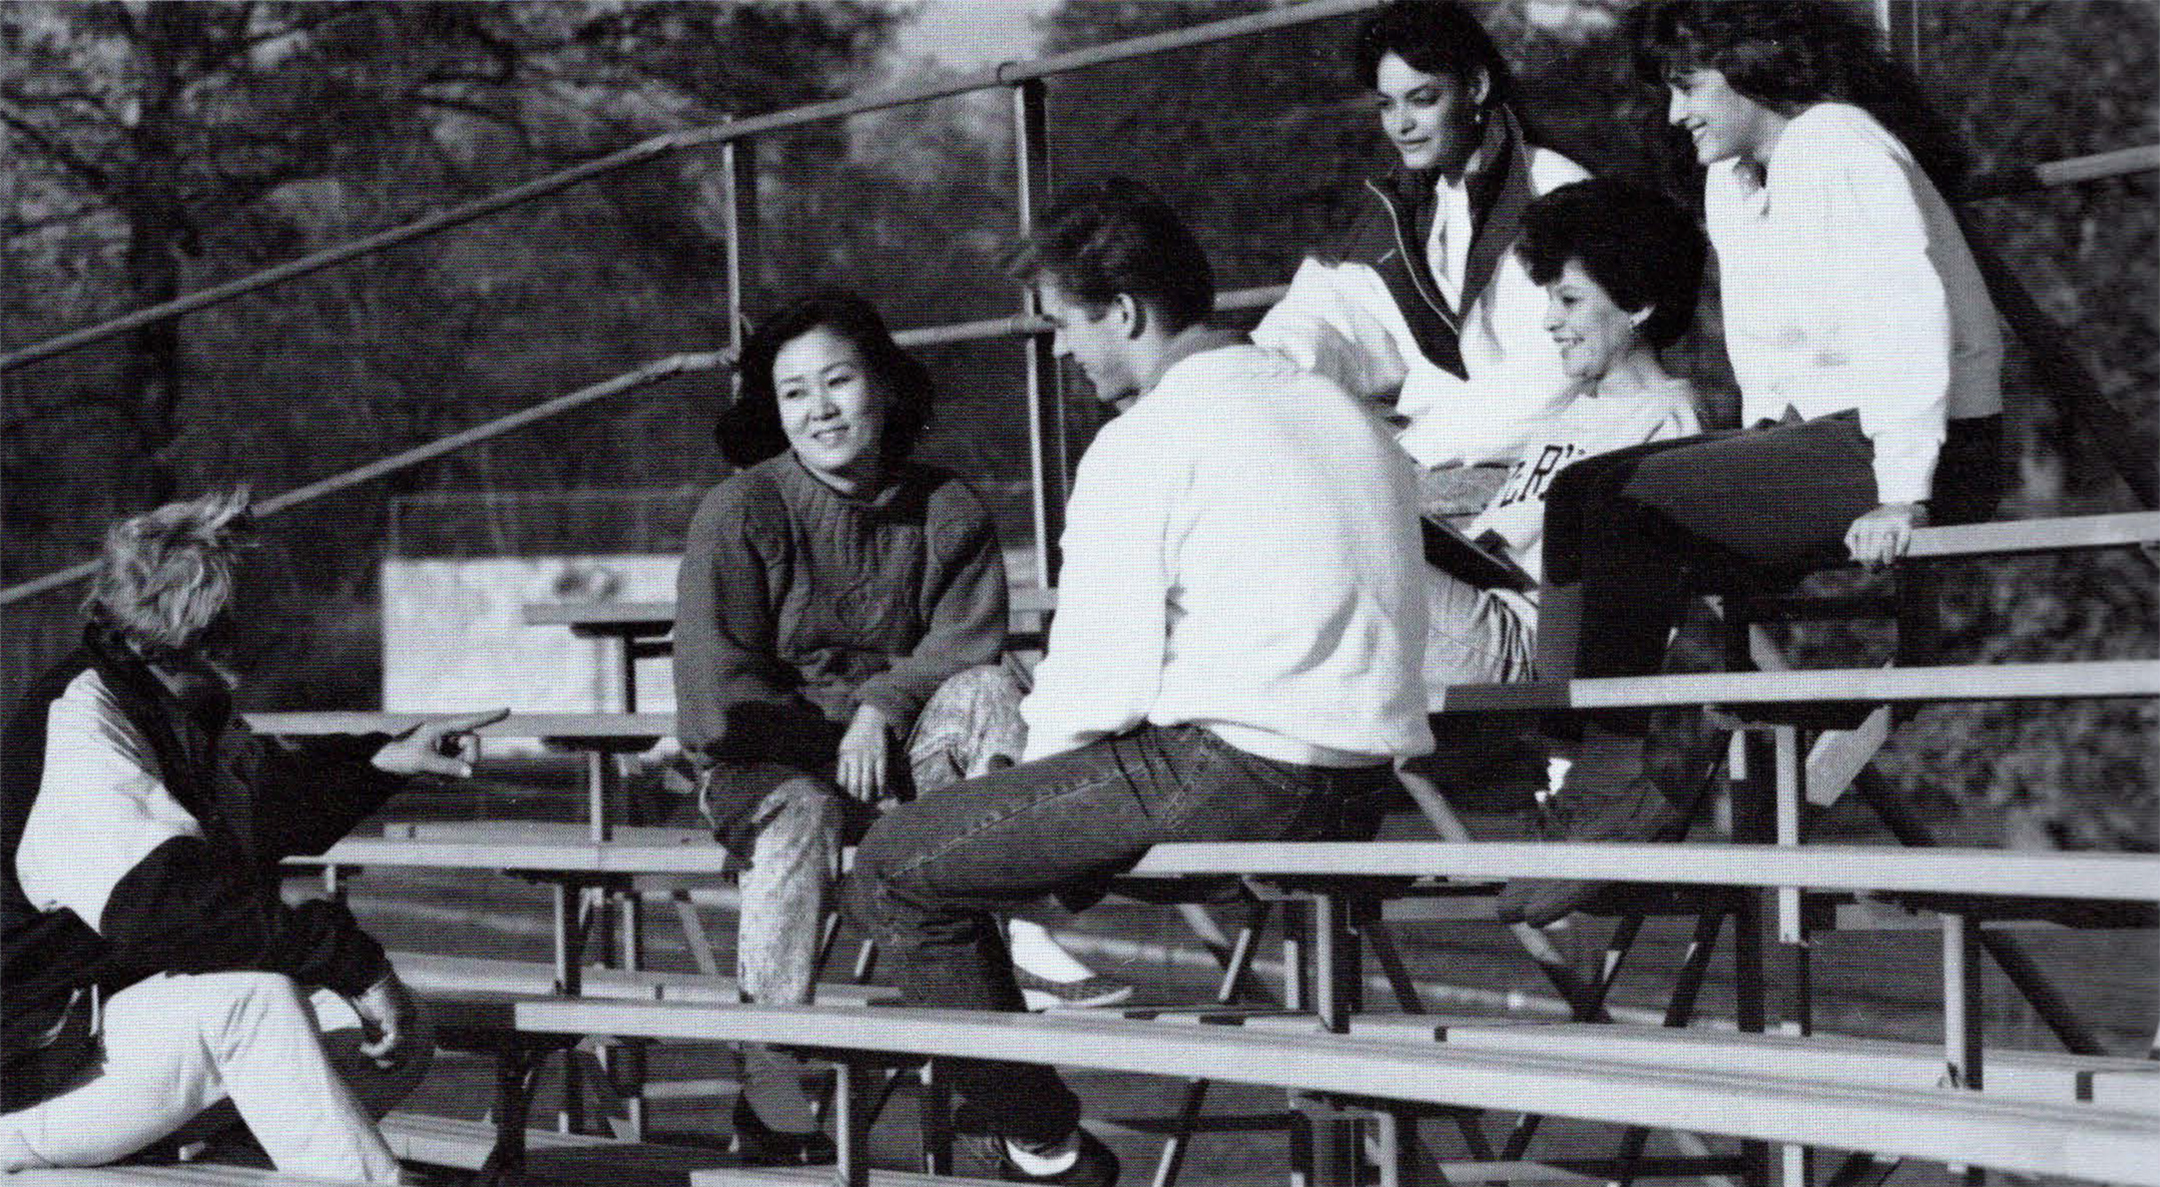 Black and white photo of six community college students sitting on bleachers